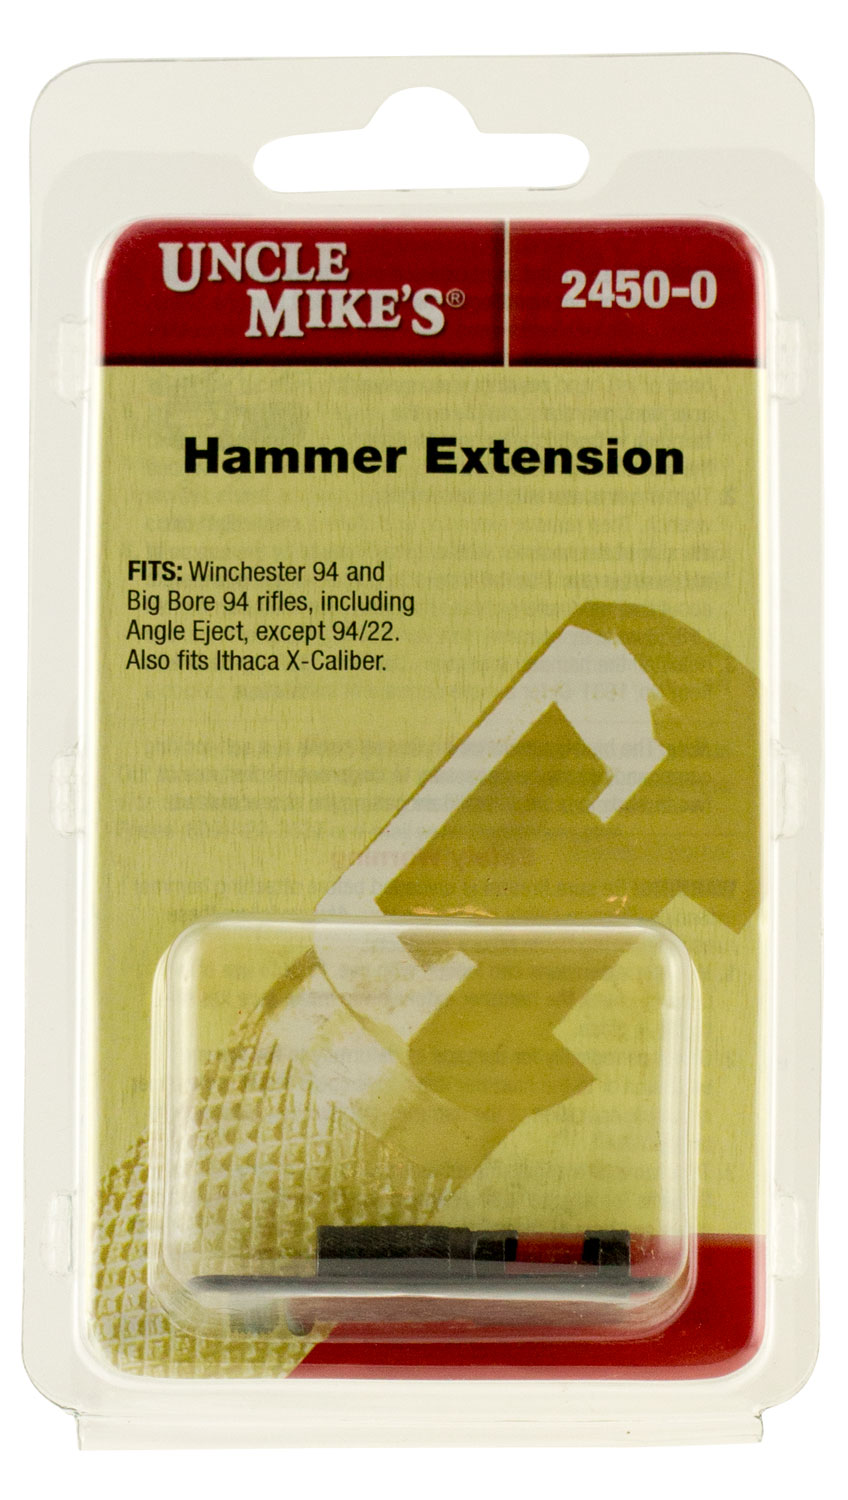 MICHAELS HAMMER EXTENSION FOR MARLIN (POST-1983 MANUFACTURE)